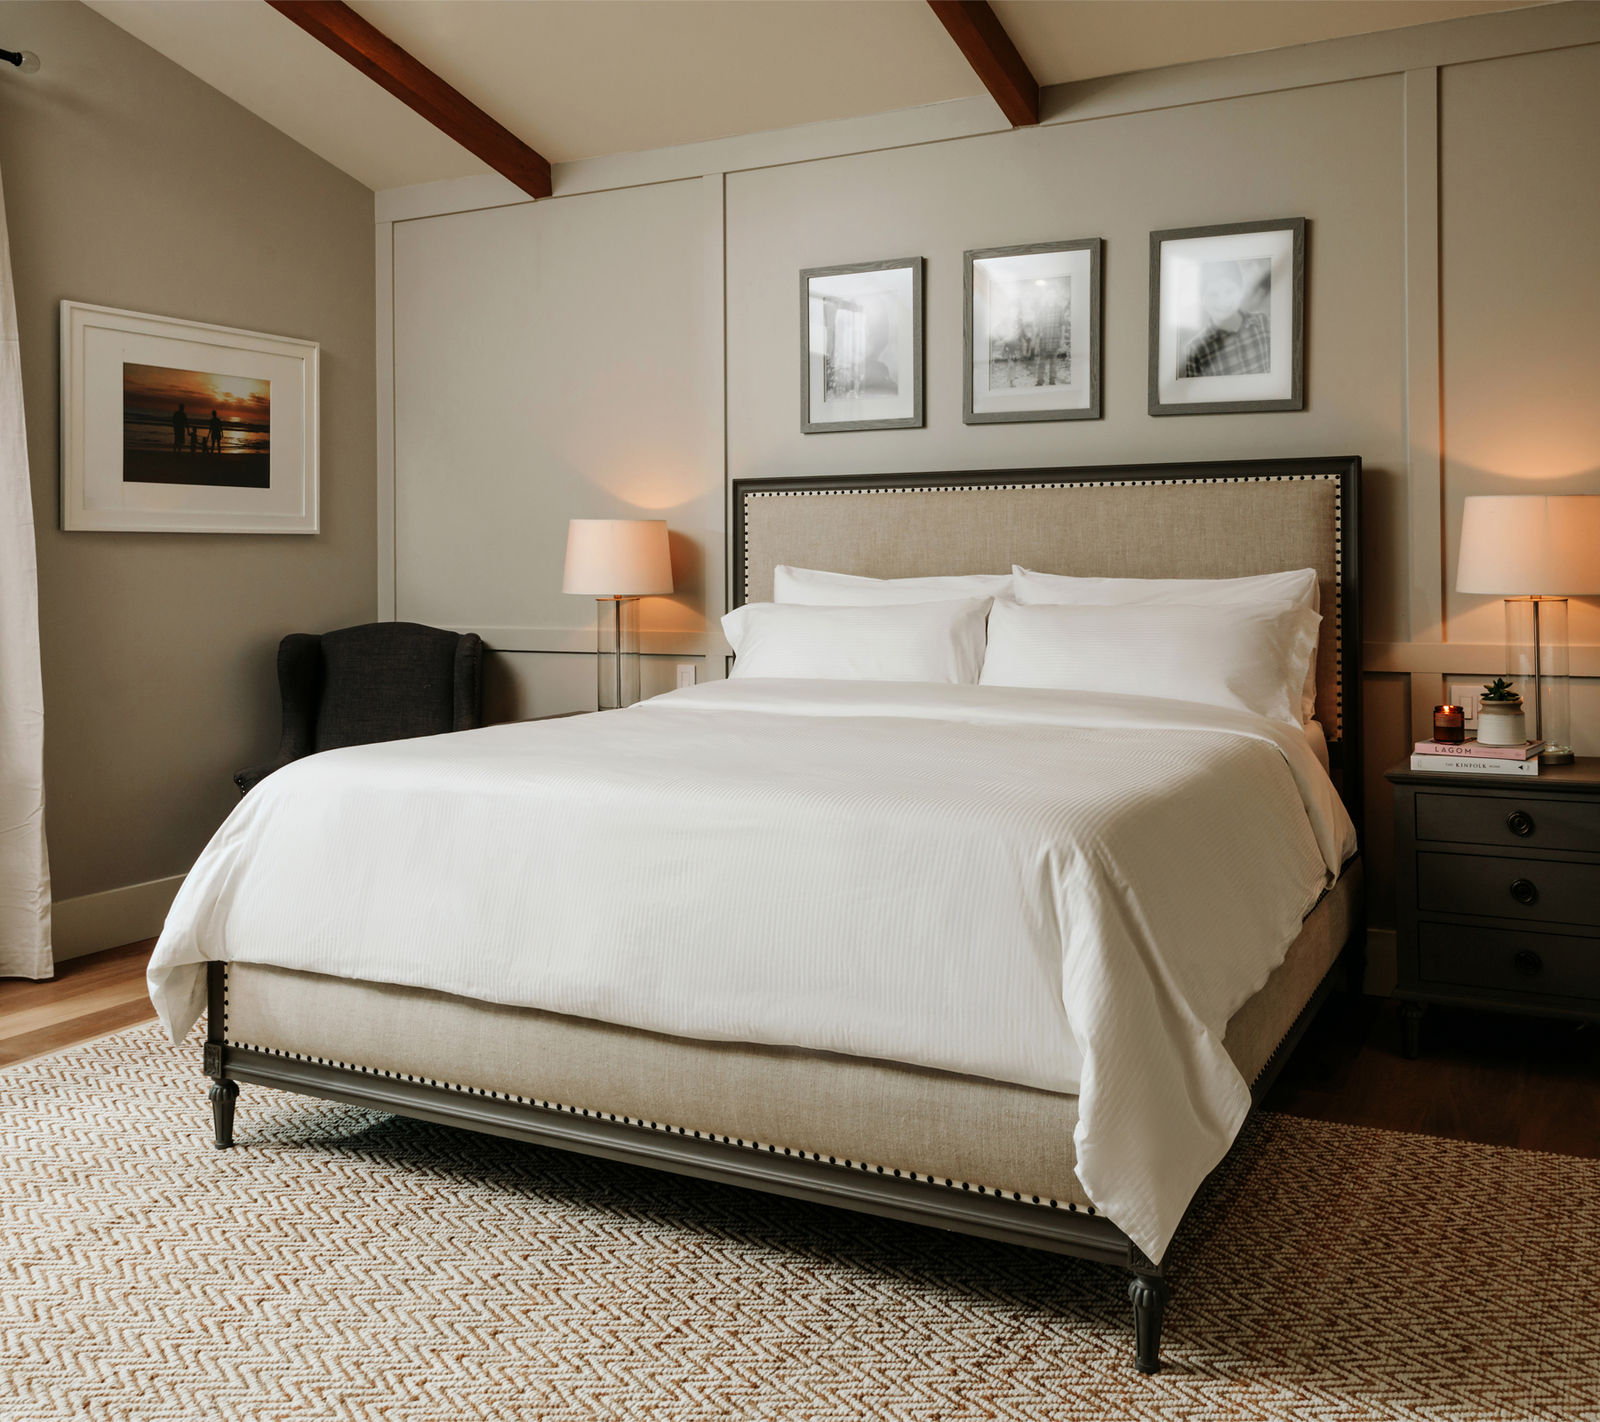 Signature Bed and Bedding Set - Buy The Marriott Bed, Signature Linens,  Towels, and More Guest Favorites from Shop Marriott